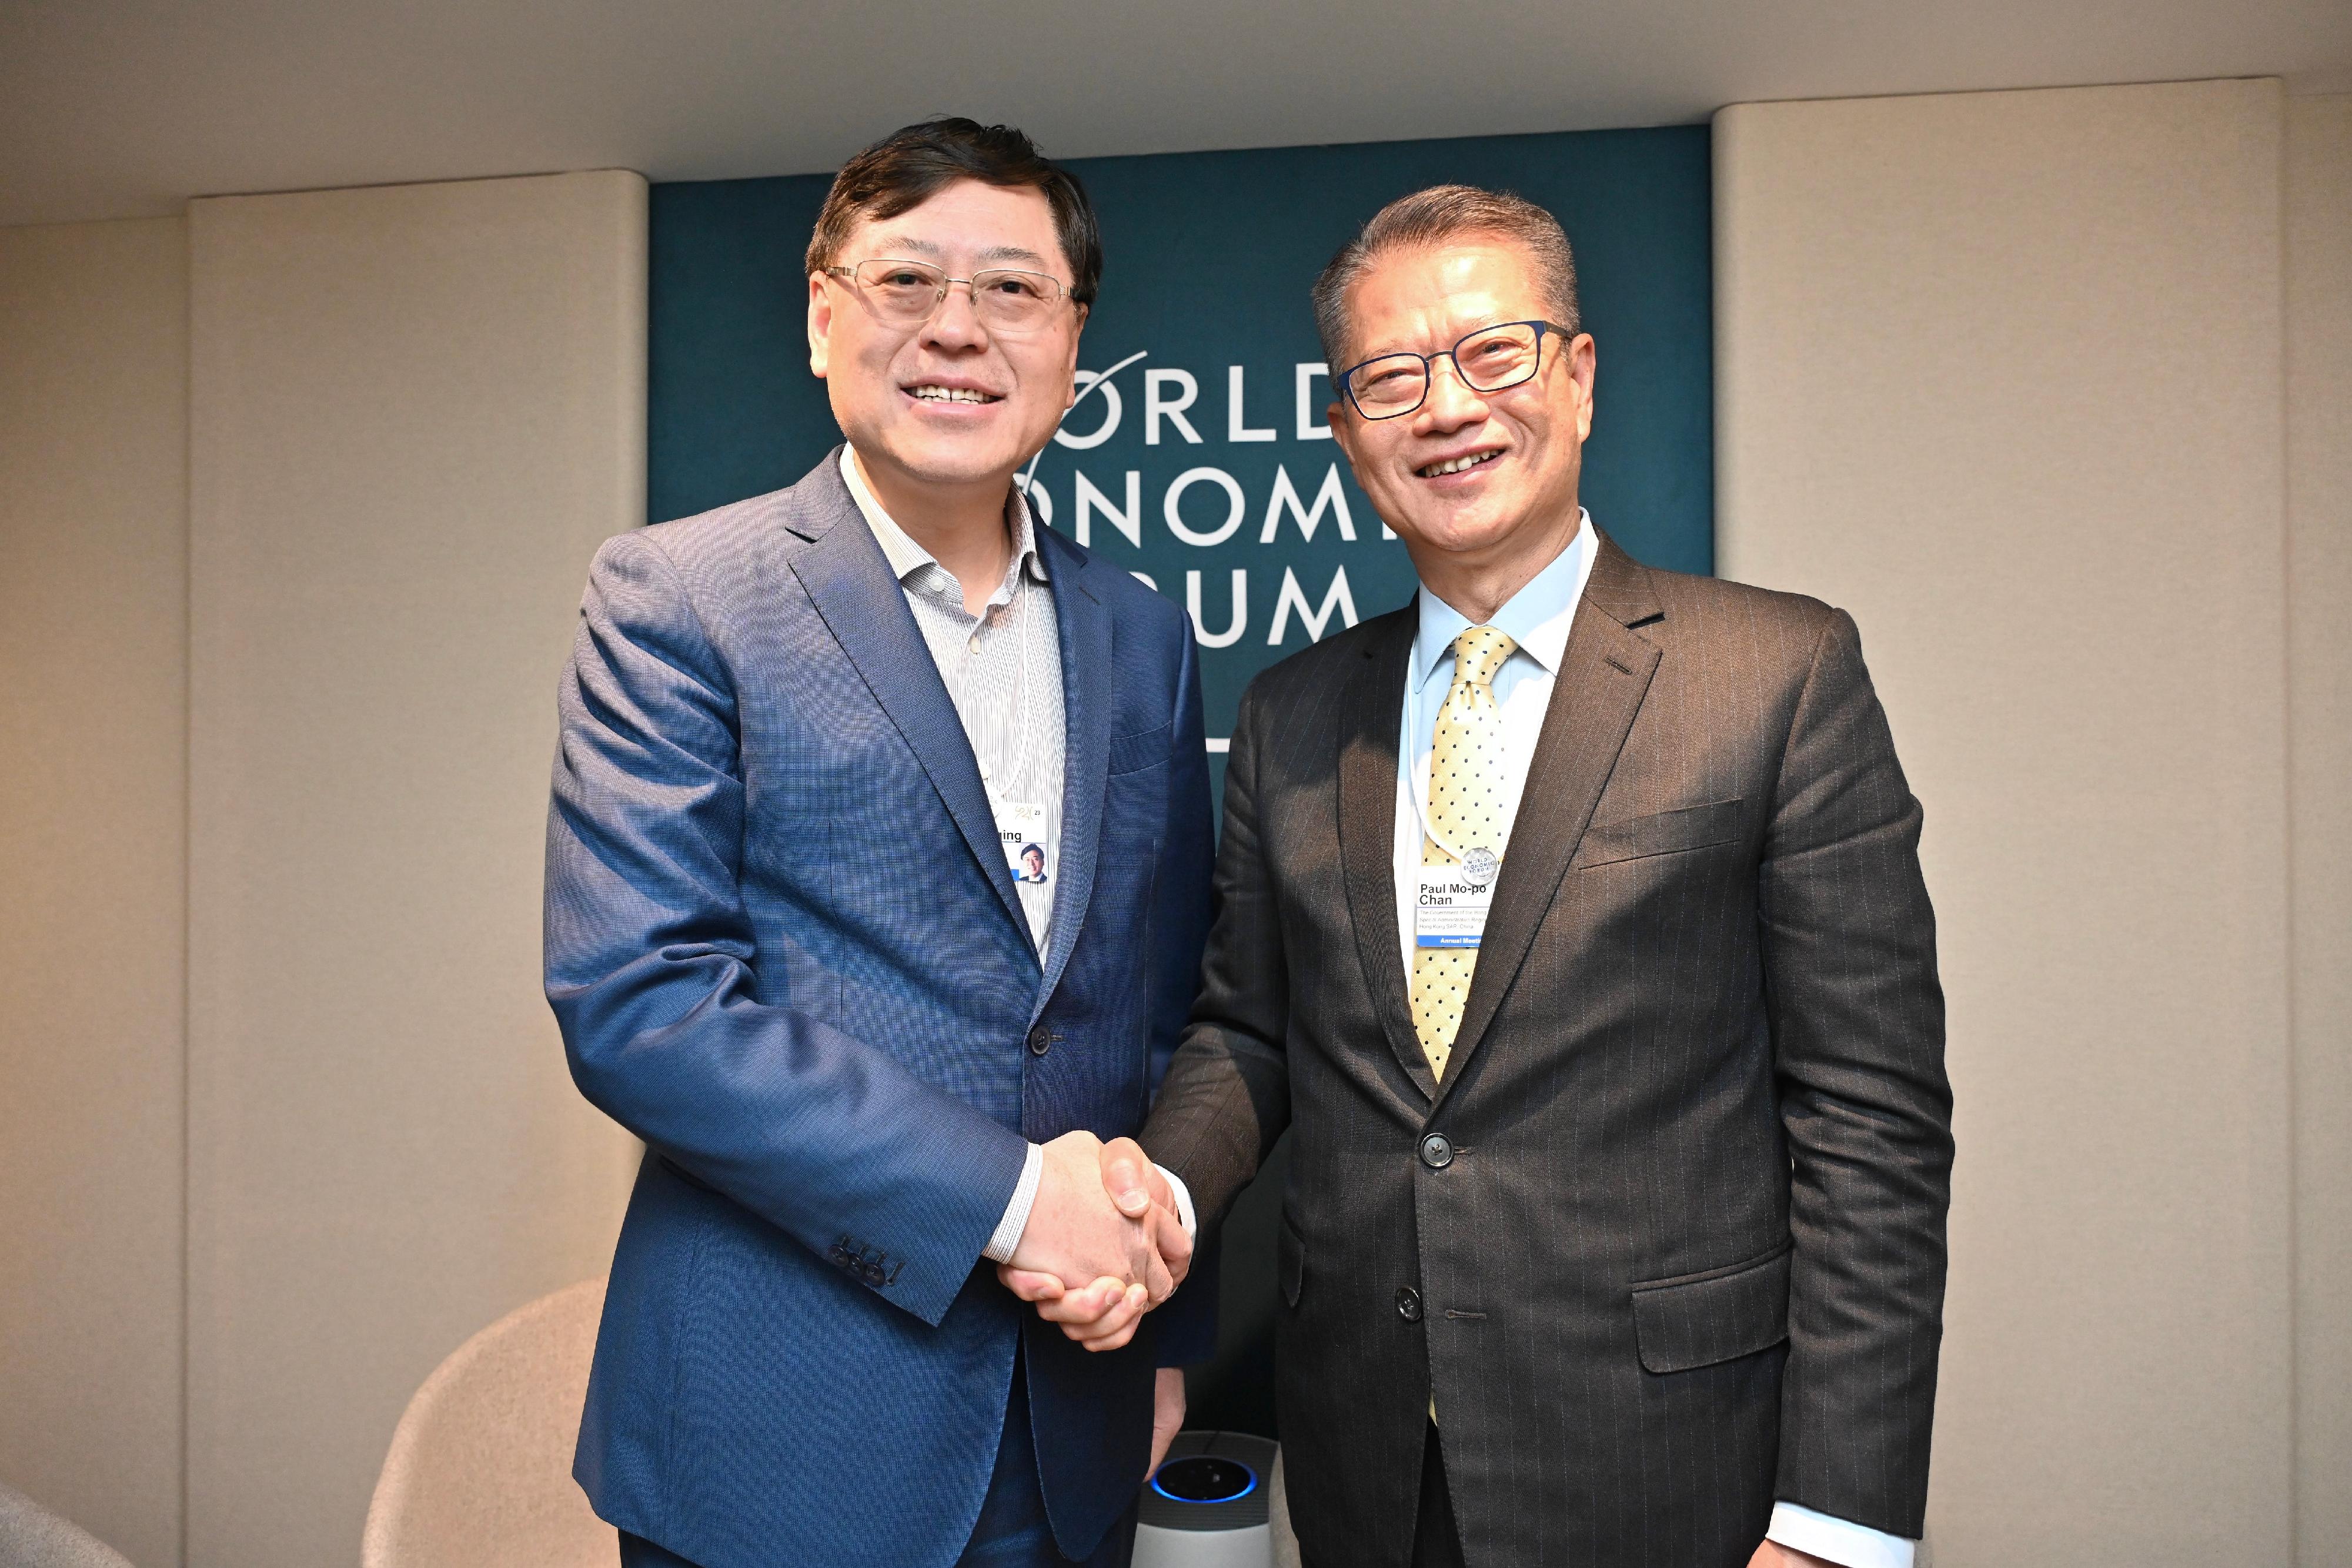 The Financial Secretary, Mr Paul Chan, continued to attend the World Economic Forum Annual Meeting at Davos, Switzerland yesterday (January 17, Davos time). Photo shows Mr Chan (right) meeting with the Chairman of Lenovo, Mr Yang Yuanqing (left).